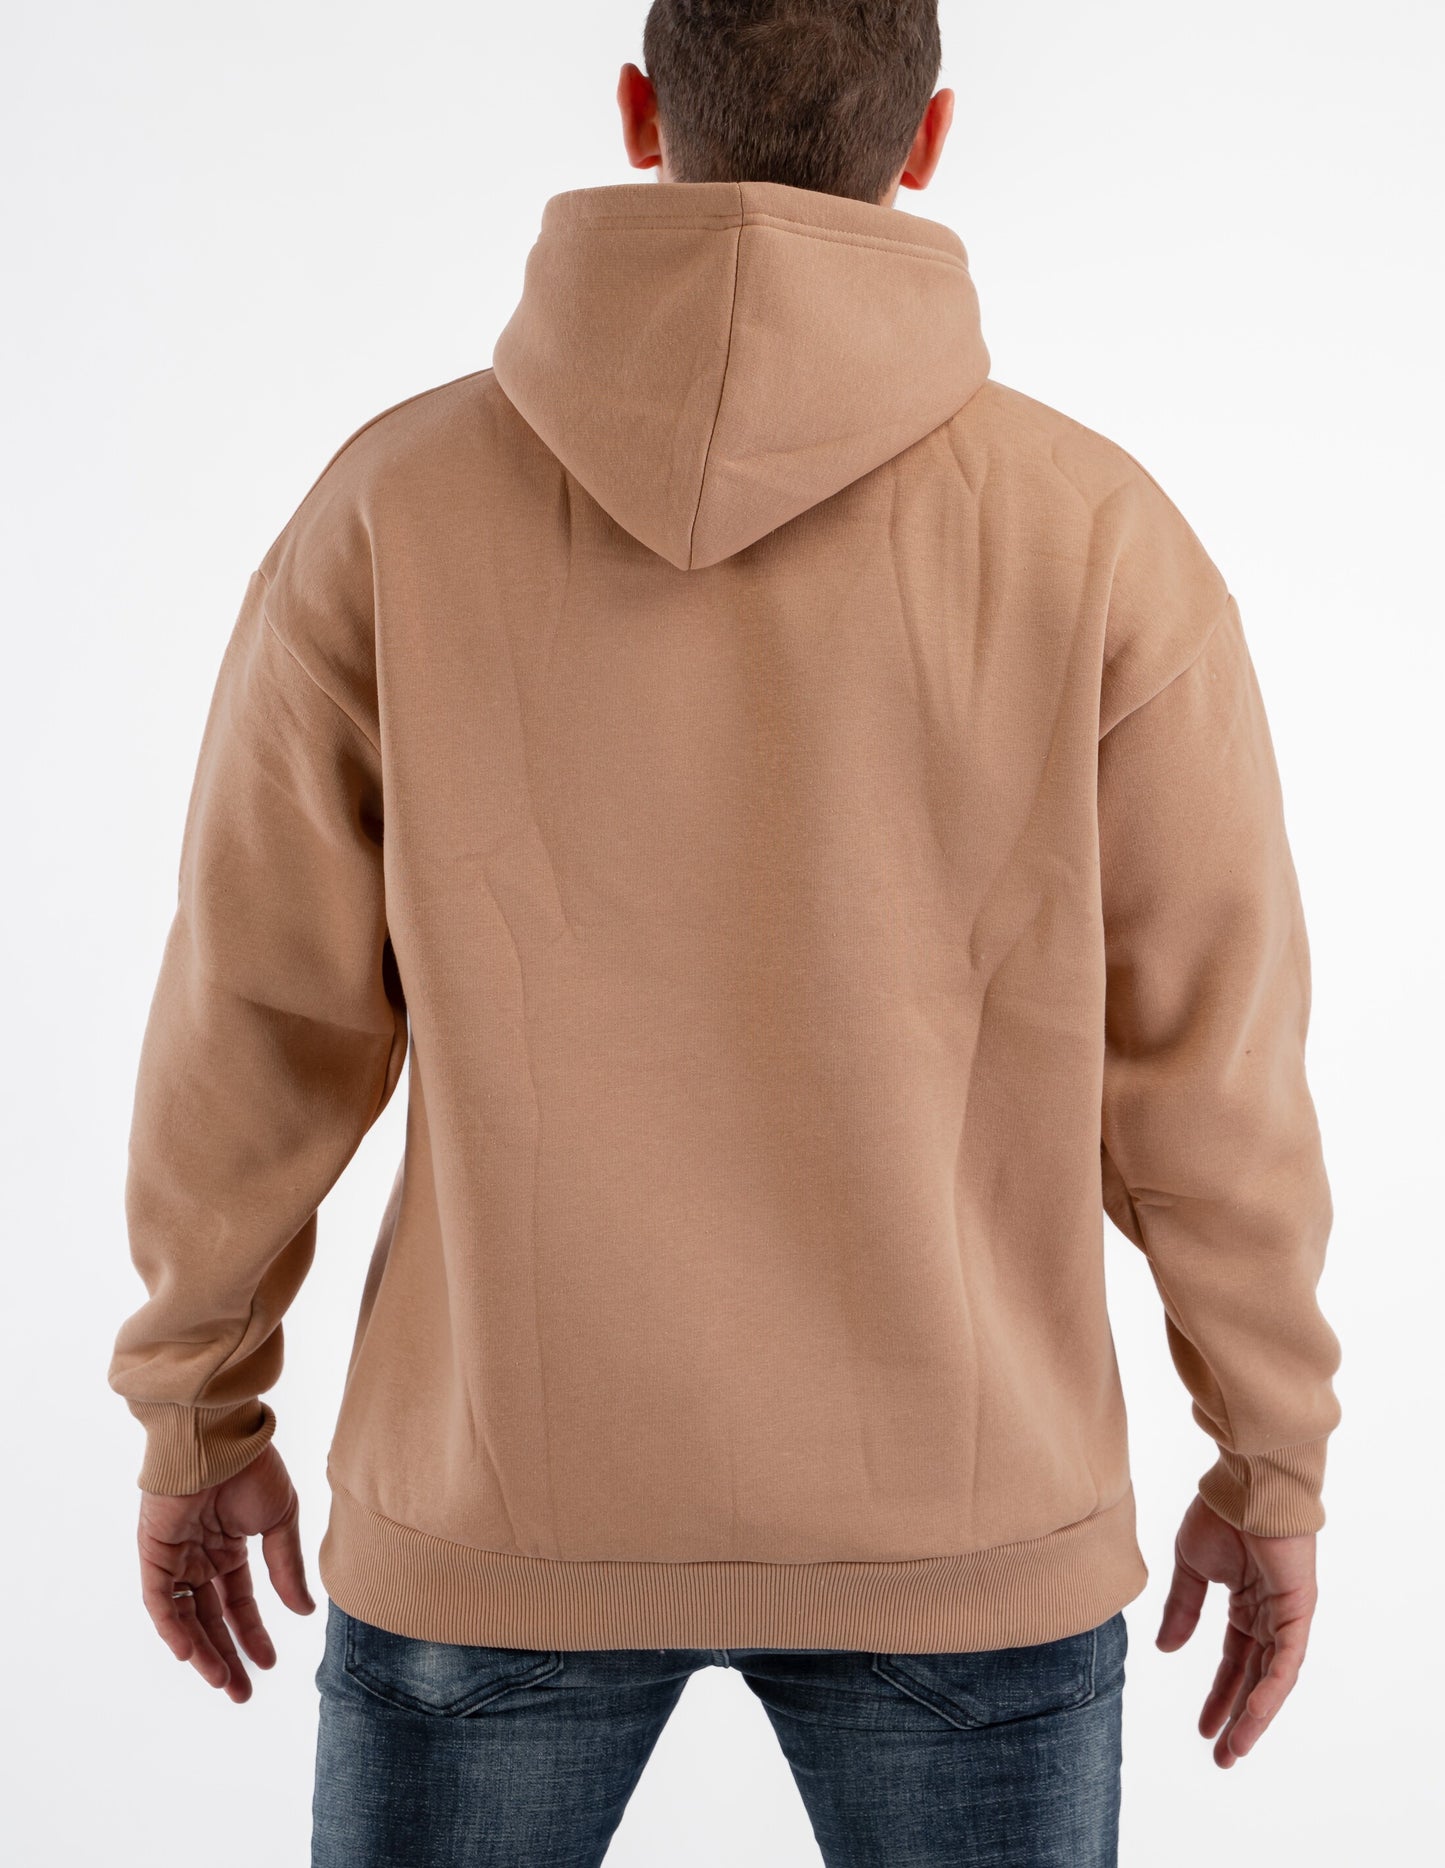 TAWNY BROWN OVER-SIZED HOODIE